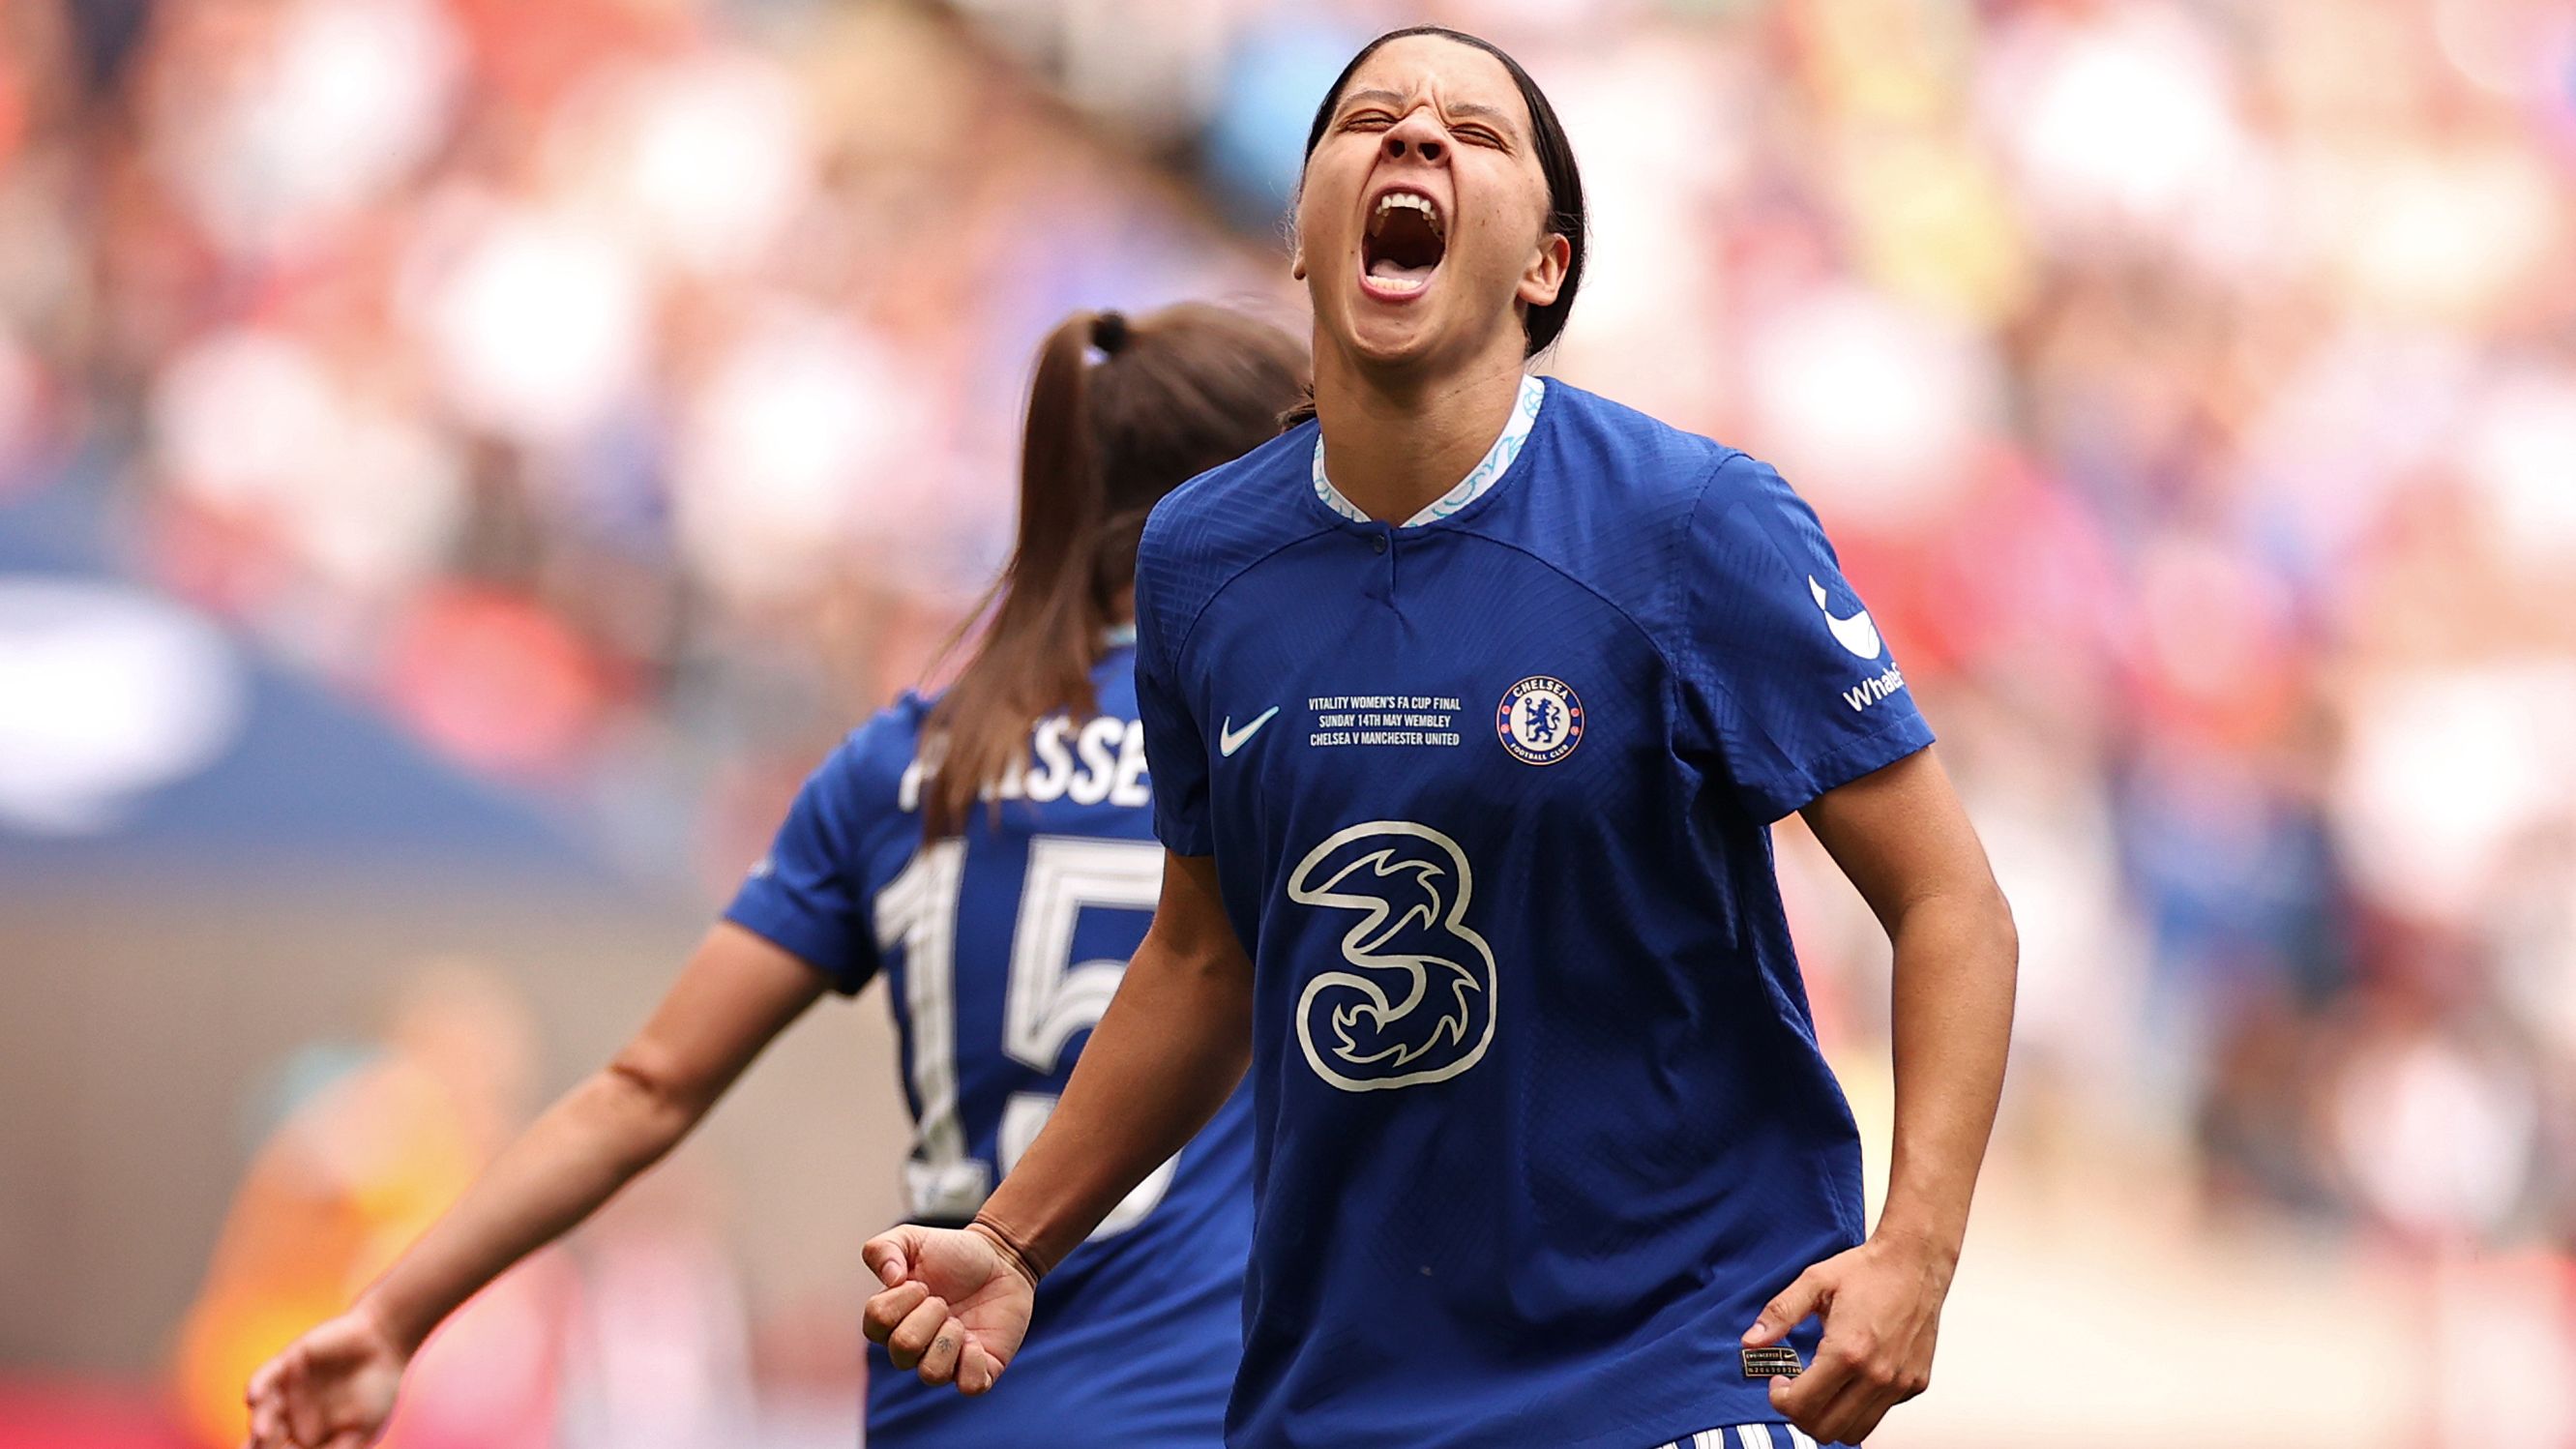 Aussie superstar Sam Kerr fires Chelsea to victory in FA Cup final